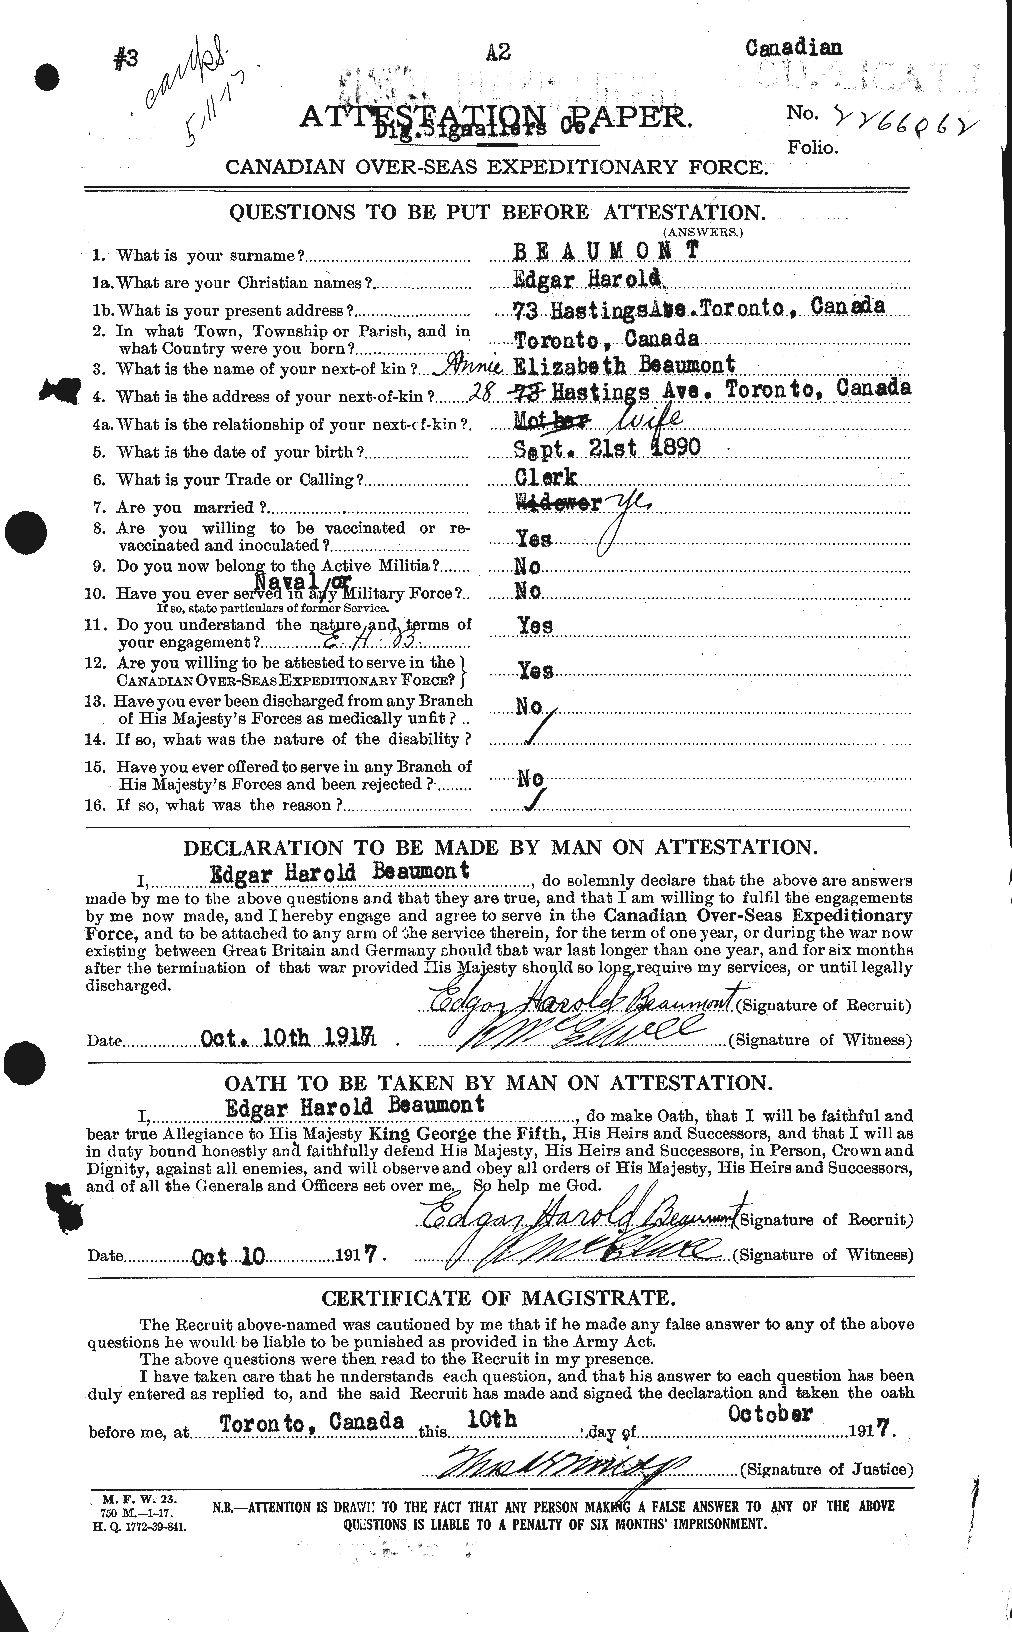 Personnel Records of the First World War - CEF 231651a